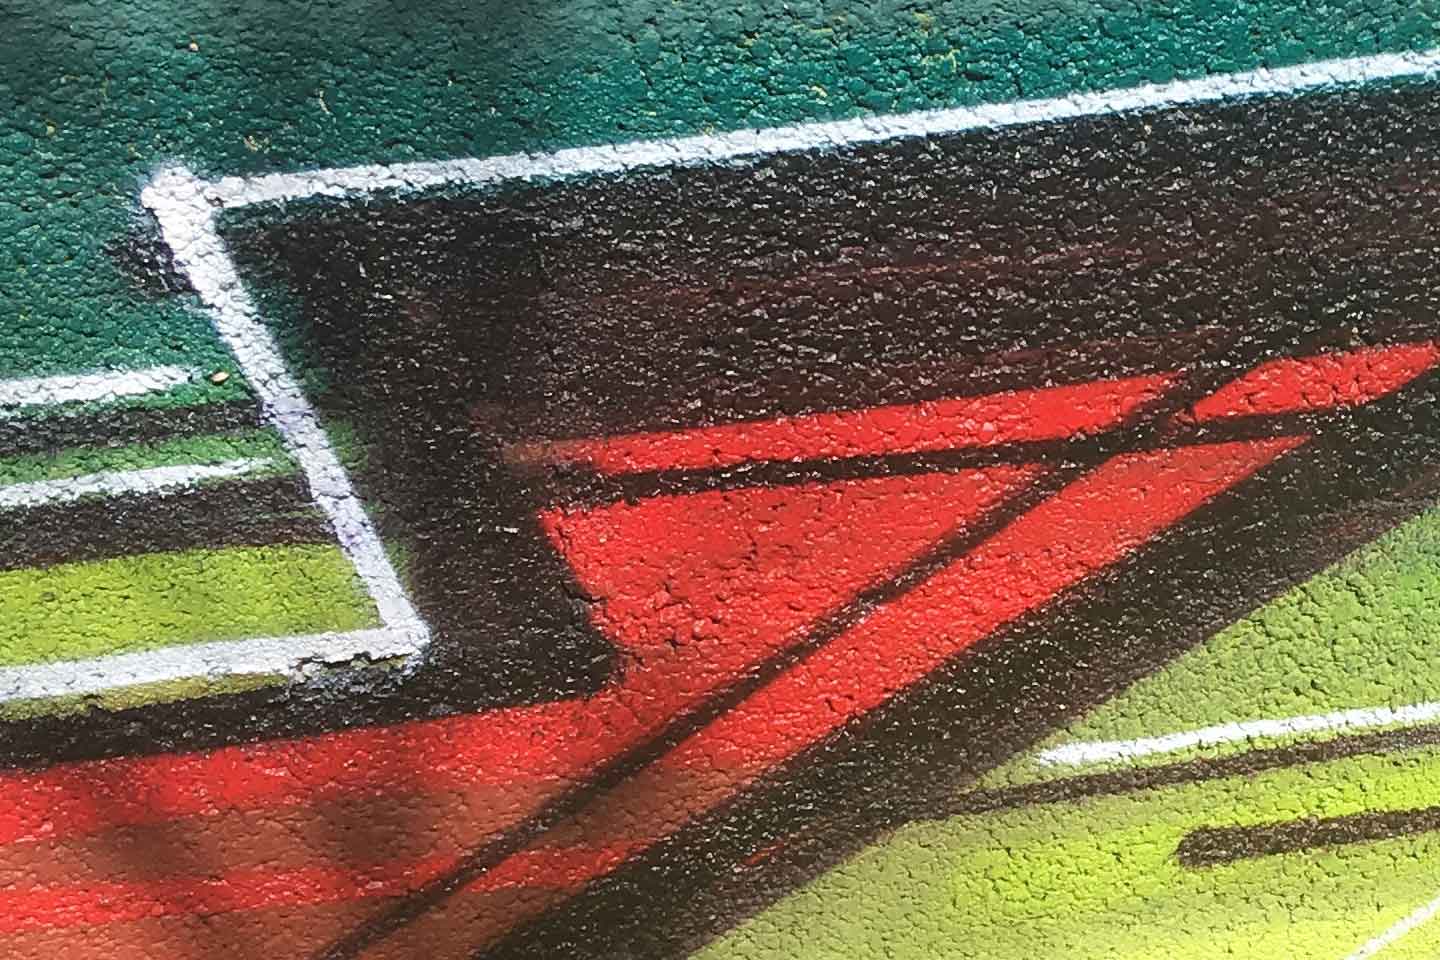 Olhao Street Art - red, black and green shapes